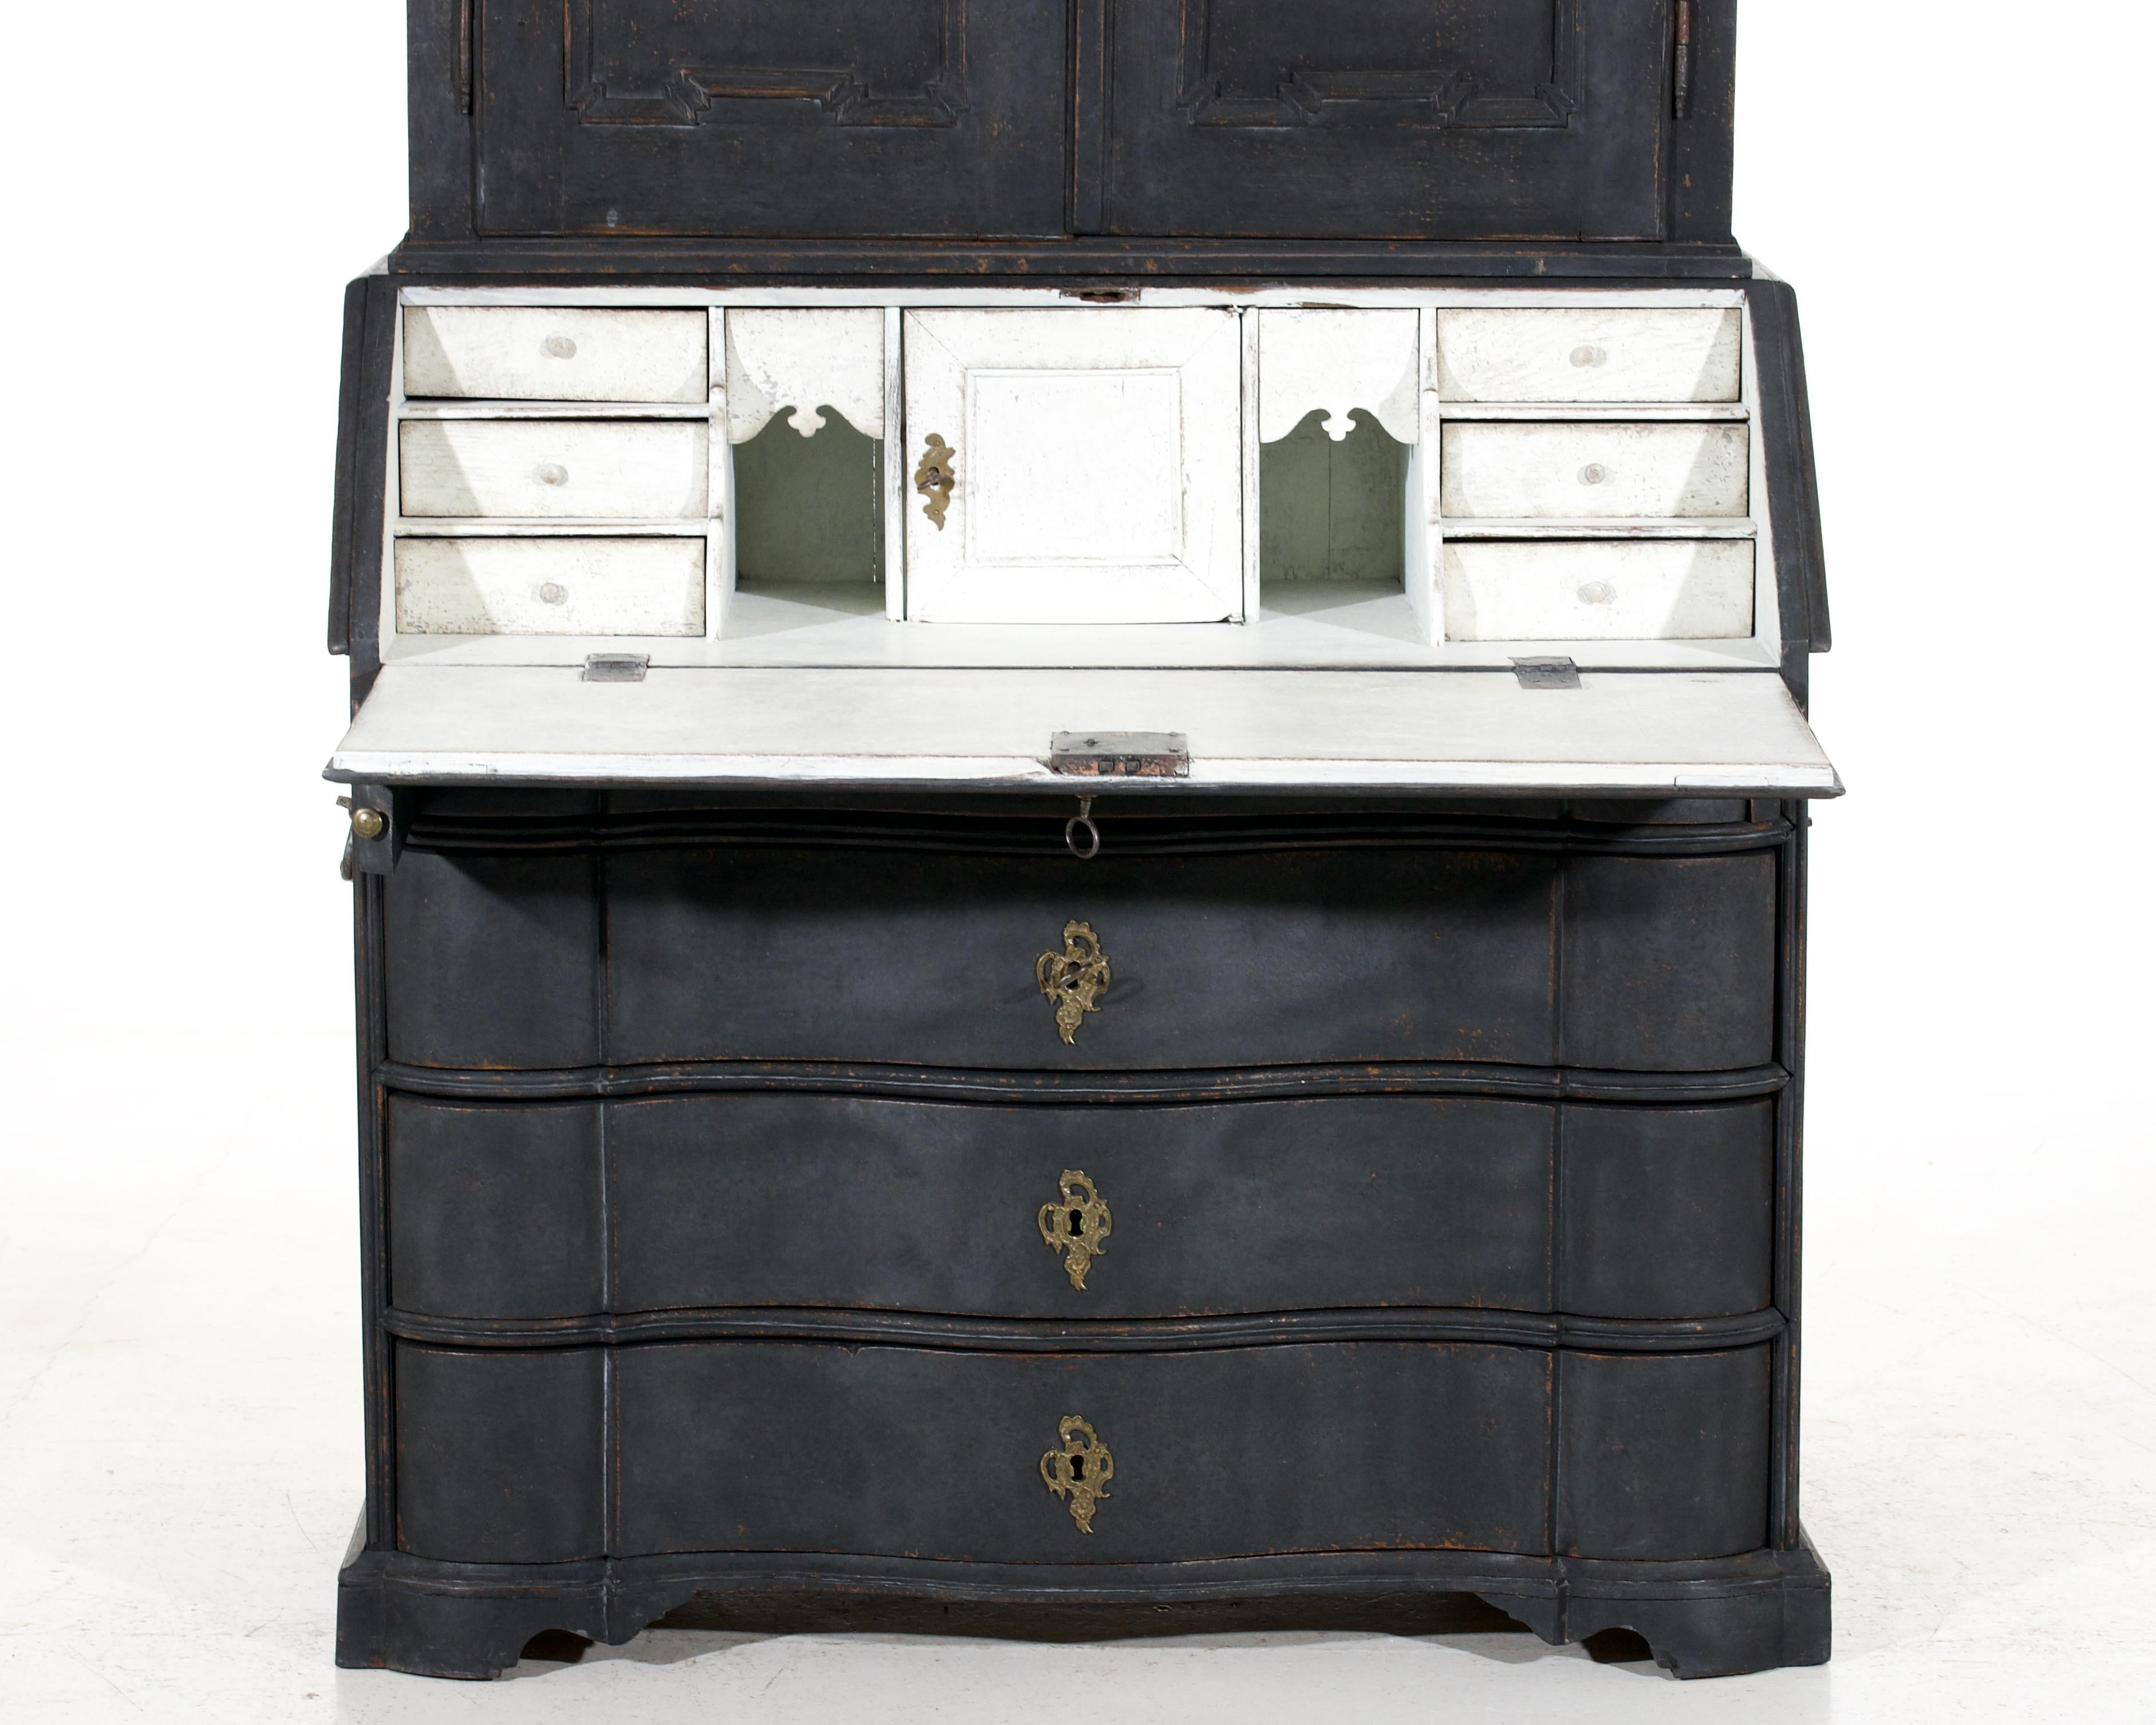 This finely crafted two-part bureau, circa 1750, was made in Sweden and features original locks and side handles. It is a beautiful example of Swedish craftsmanship. This bureau is a unique and highly desirable piece.